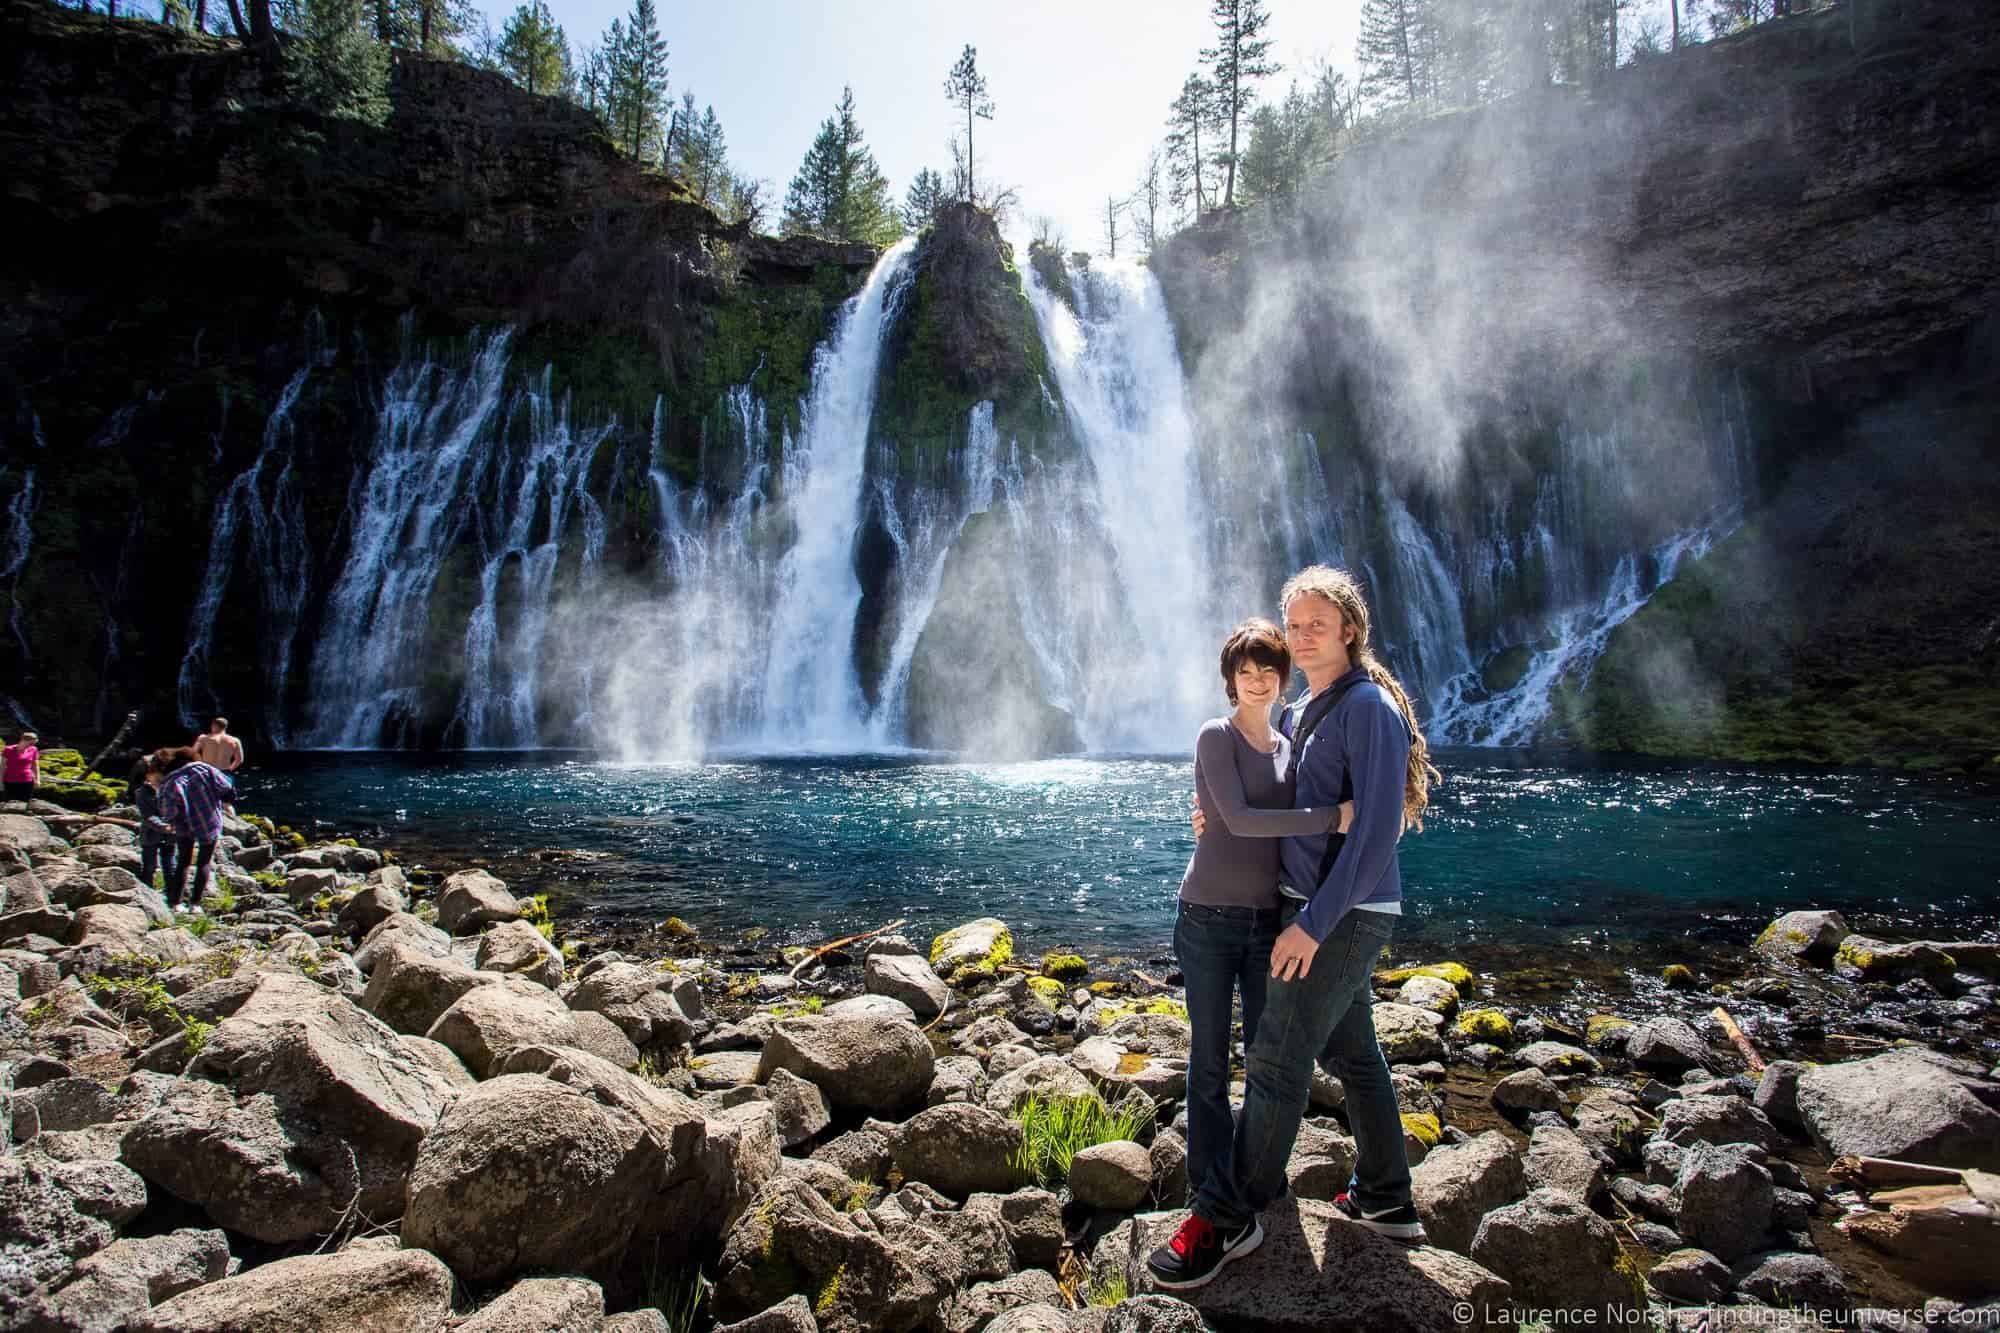 Lauraence Norah and his wife, Jessica, stand in front of a waterfall.